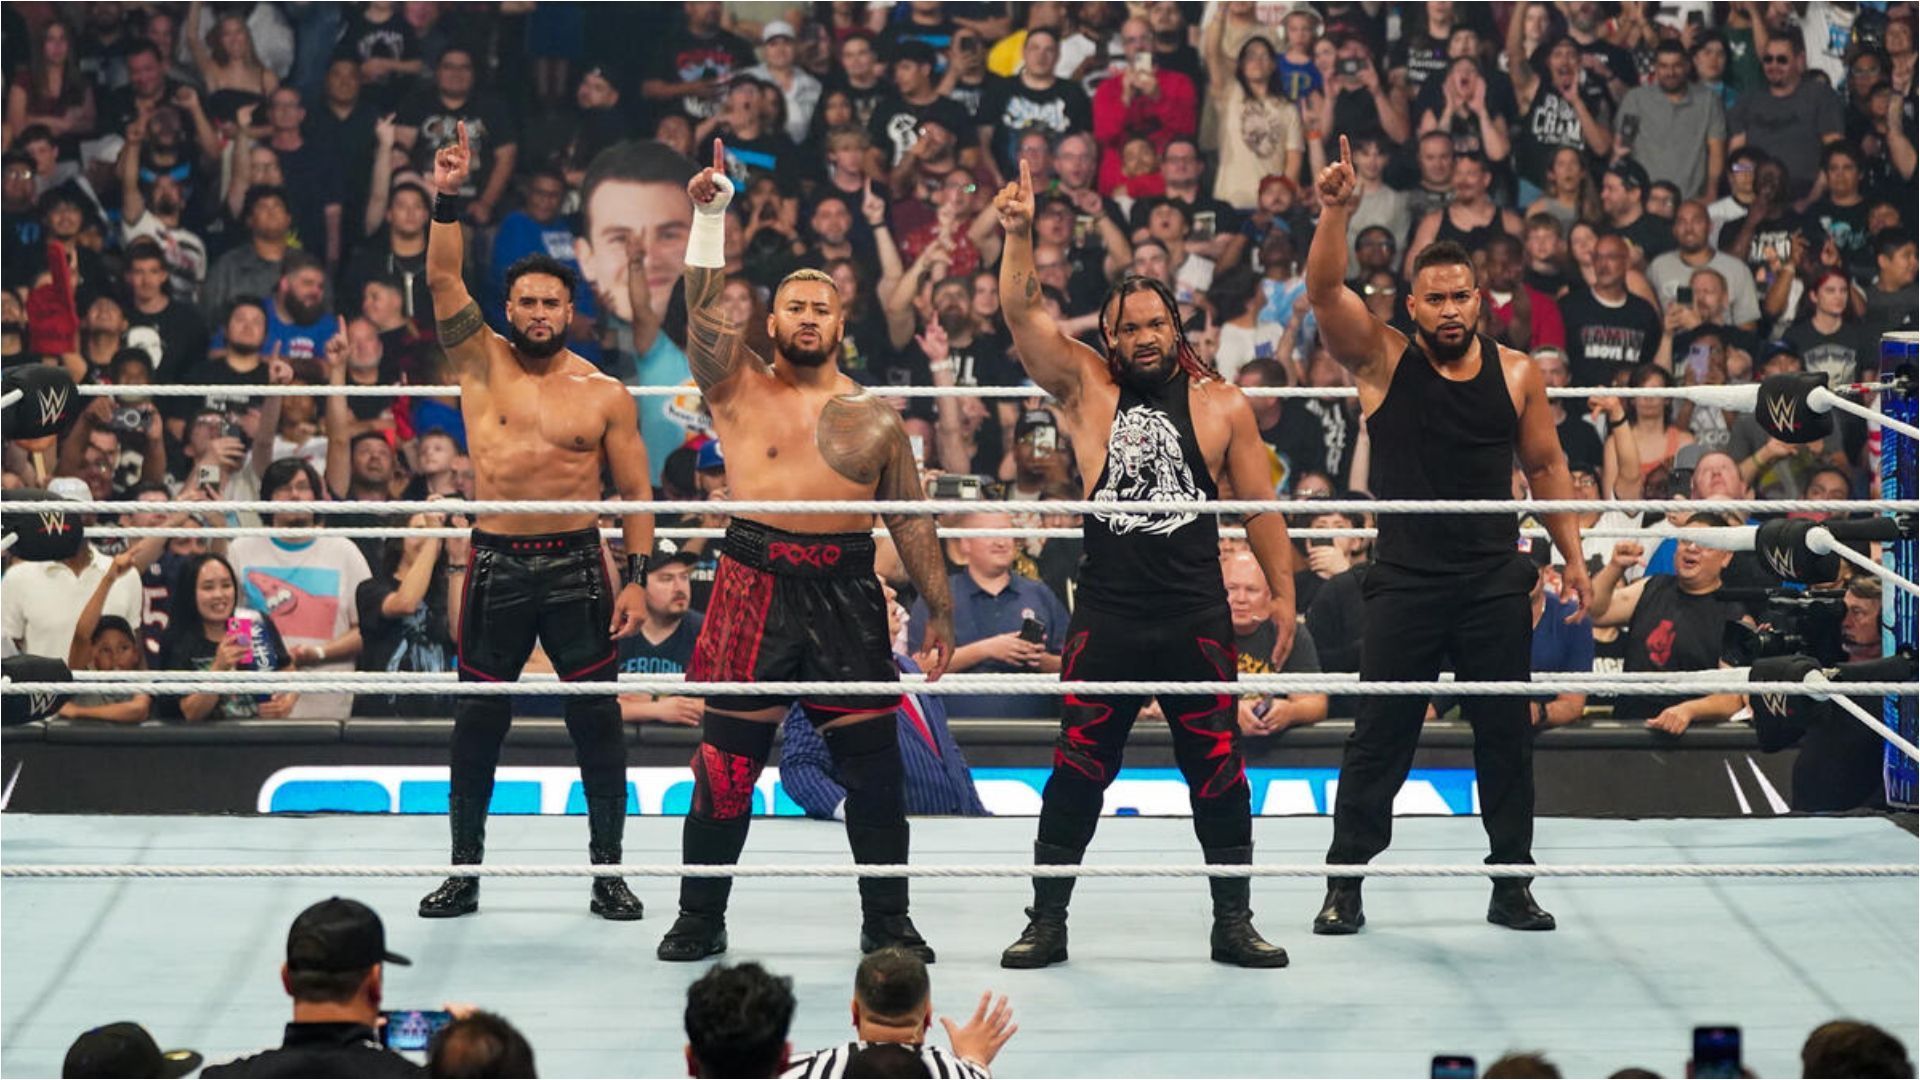 The new Bloodline on WWE SmackDown. (Image source: WWE.com)